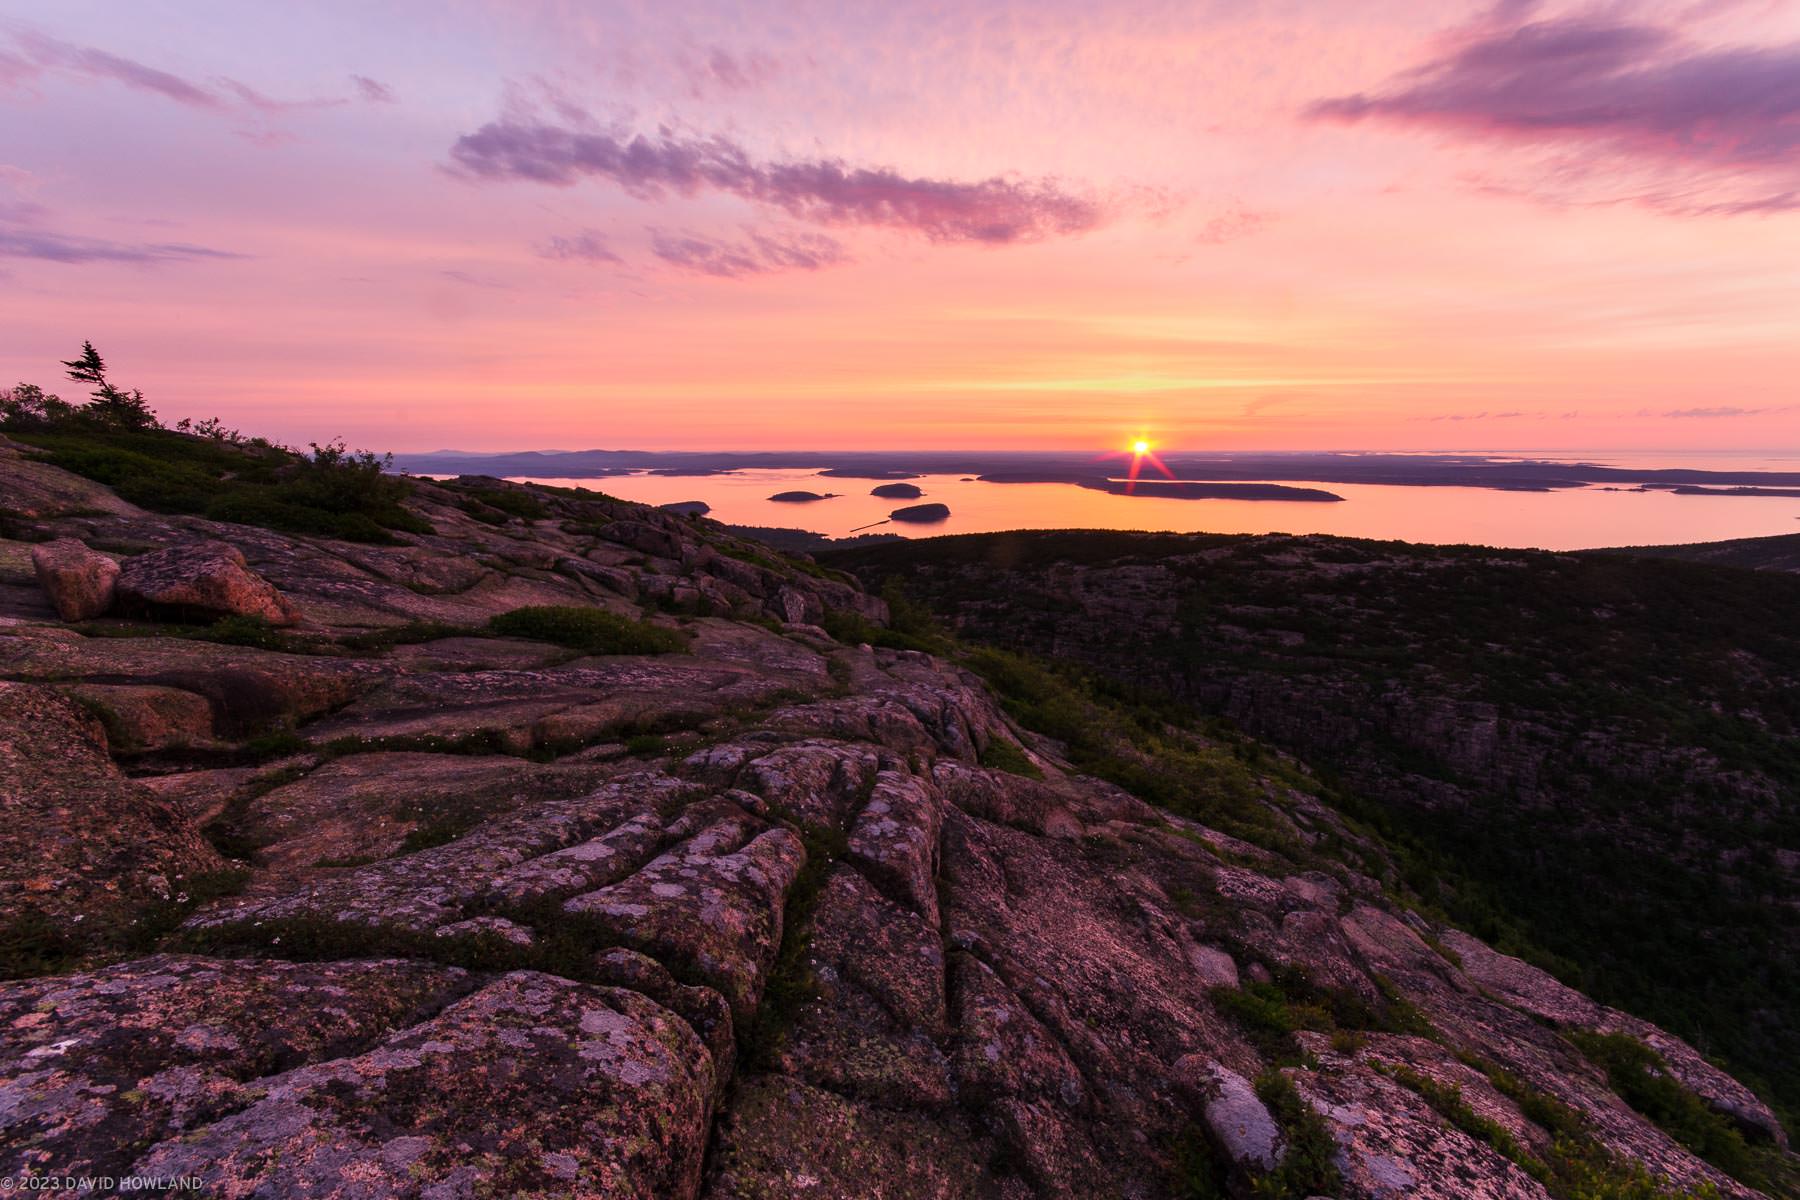 A photo of the sun rising over the calm waters of Frenchman Bay and lighthing up the cracked granite slopes of Cadillac Mountain in Acadia National Park in Maine.